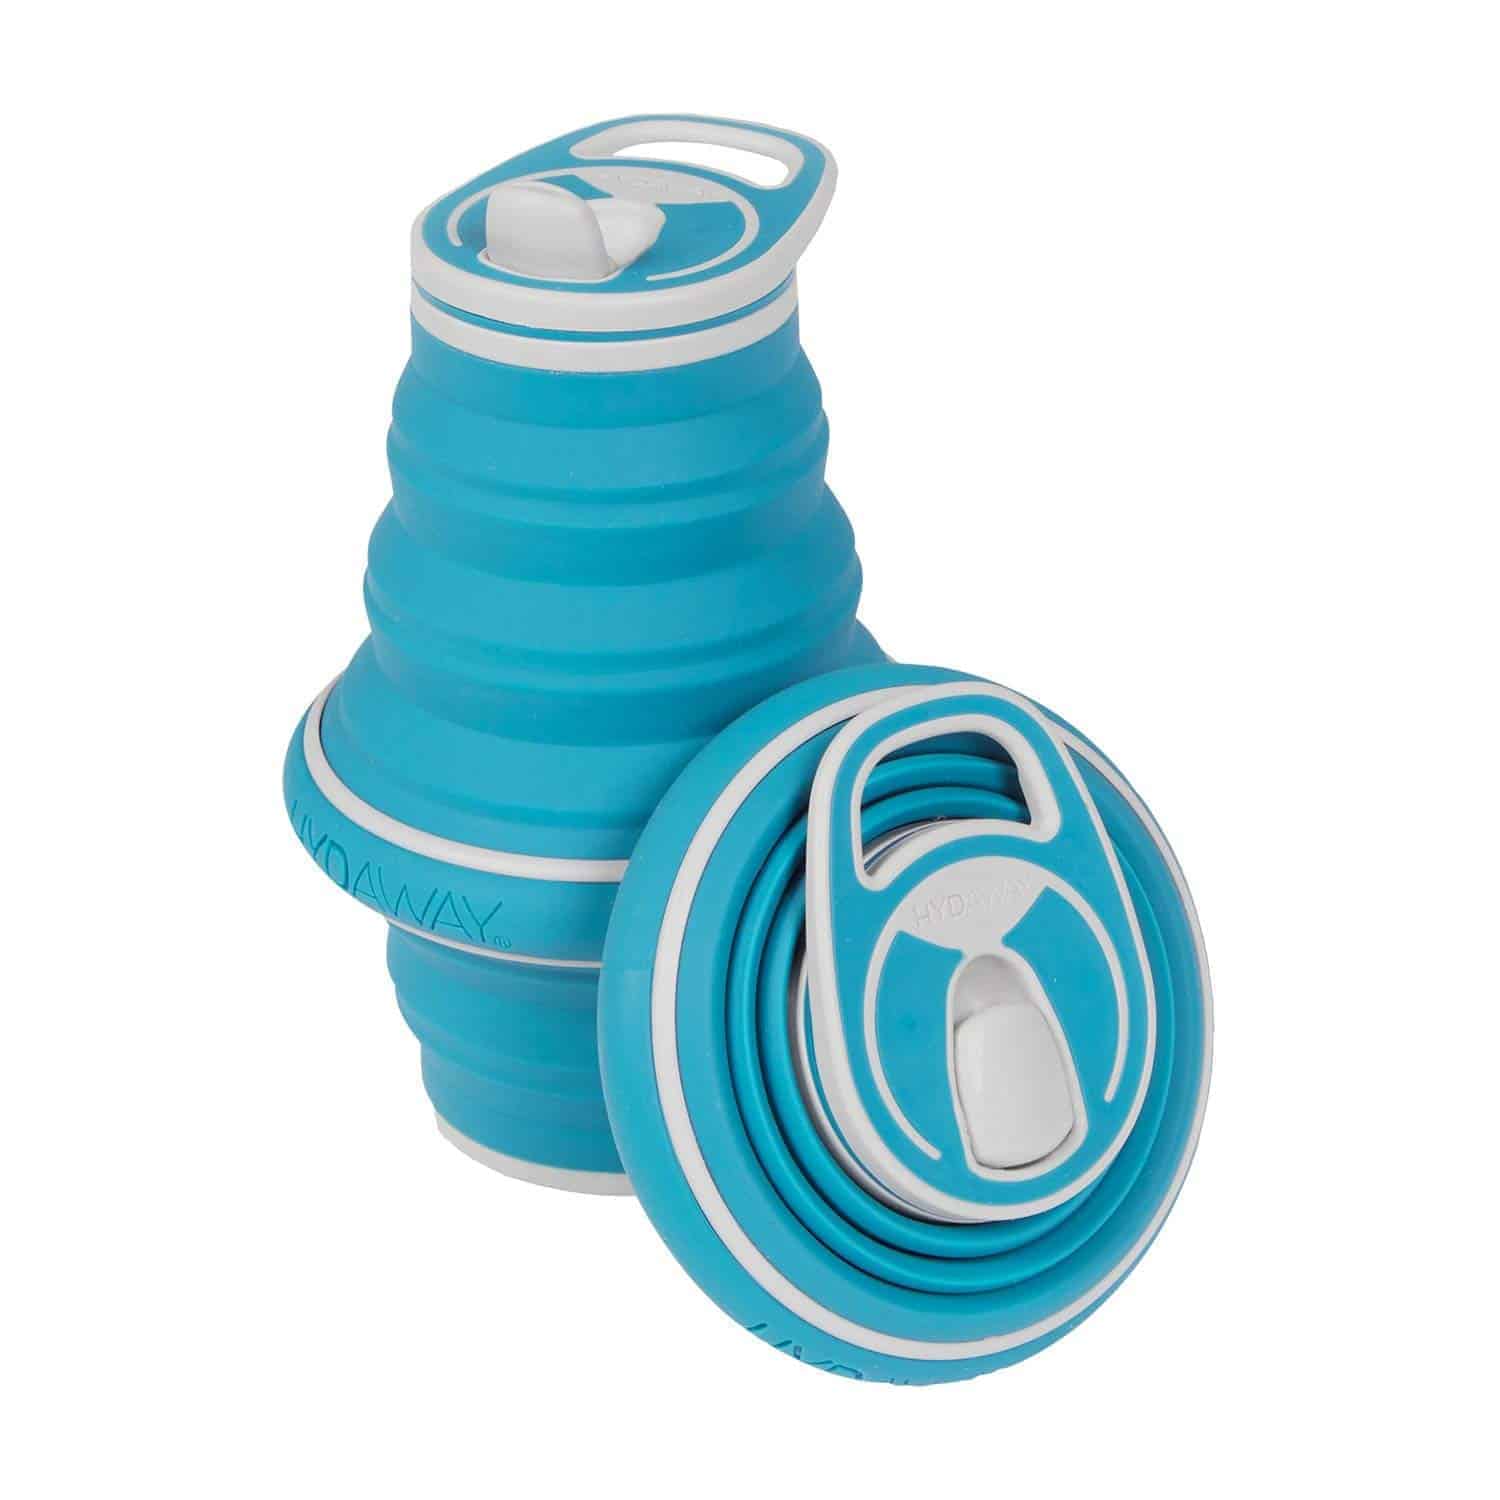 Unique & Innovative Collapsible Water Bottles